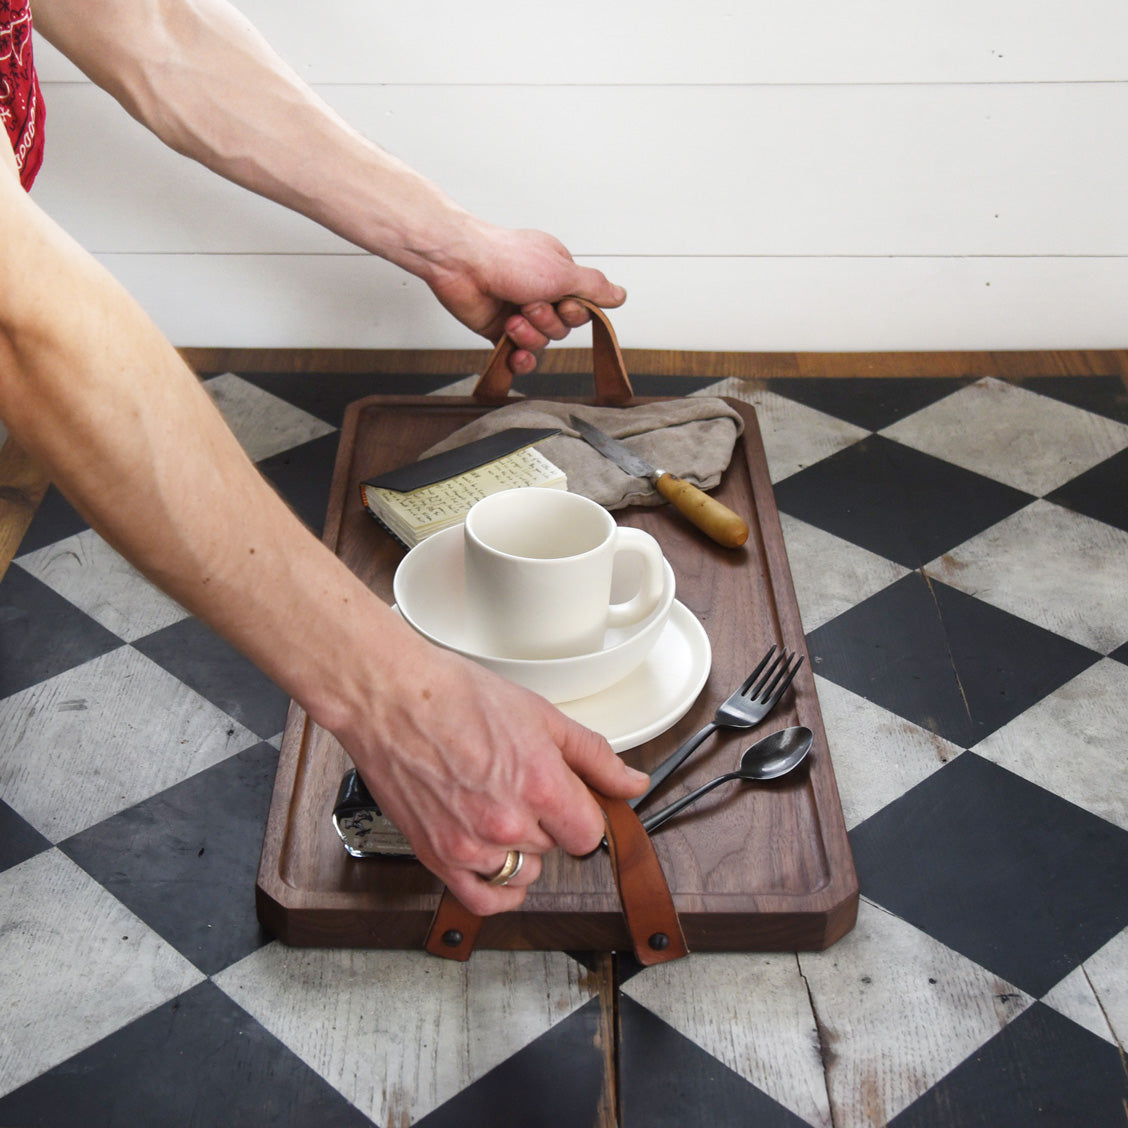 The Watson Serving Tray by Peg and Awl